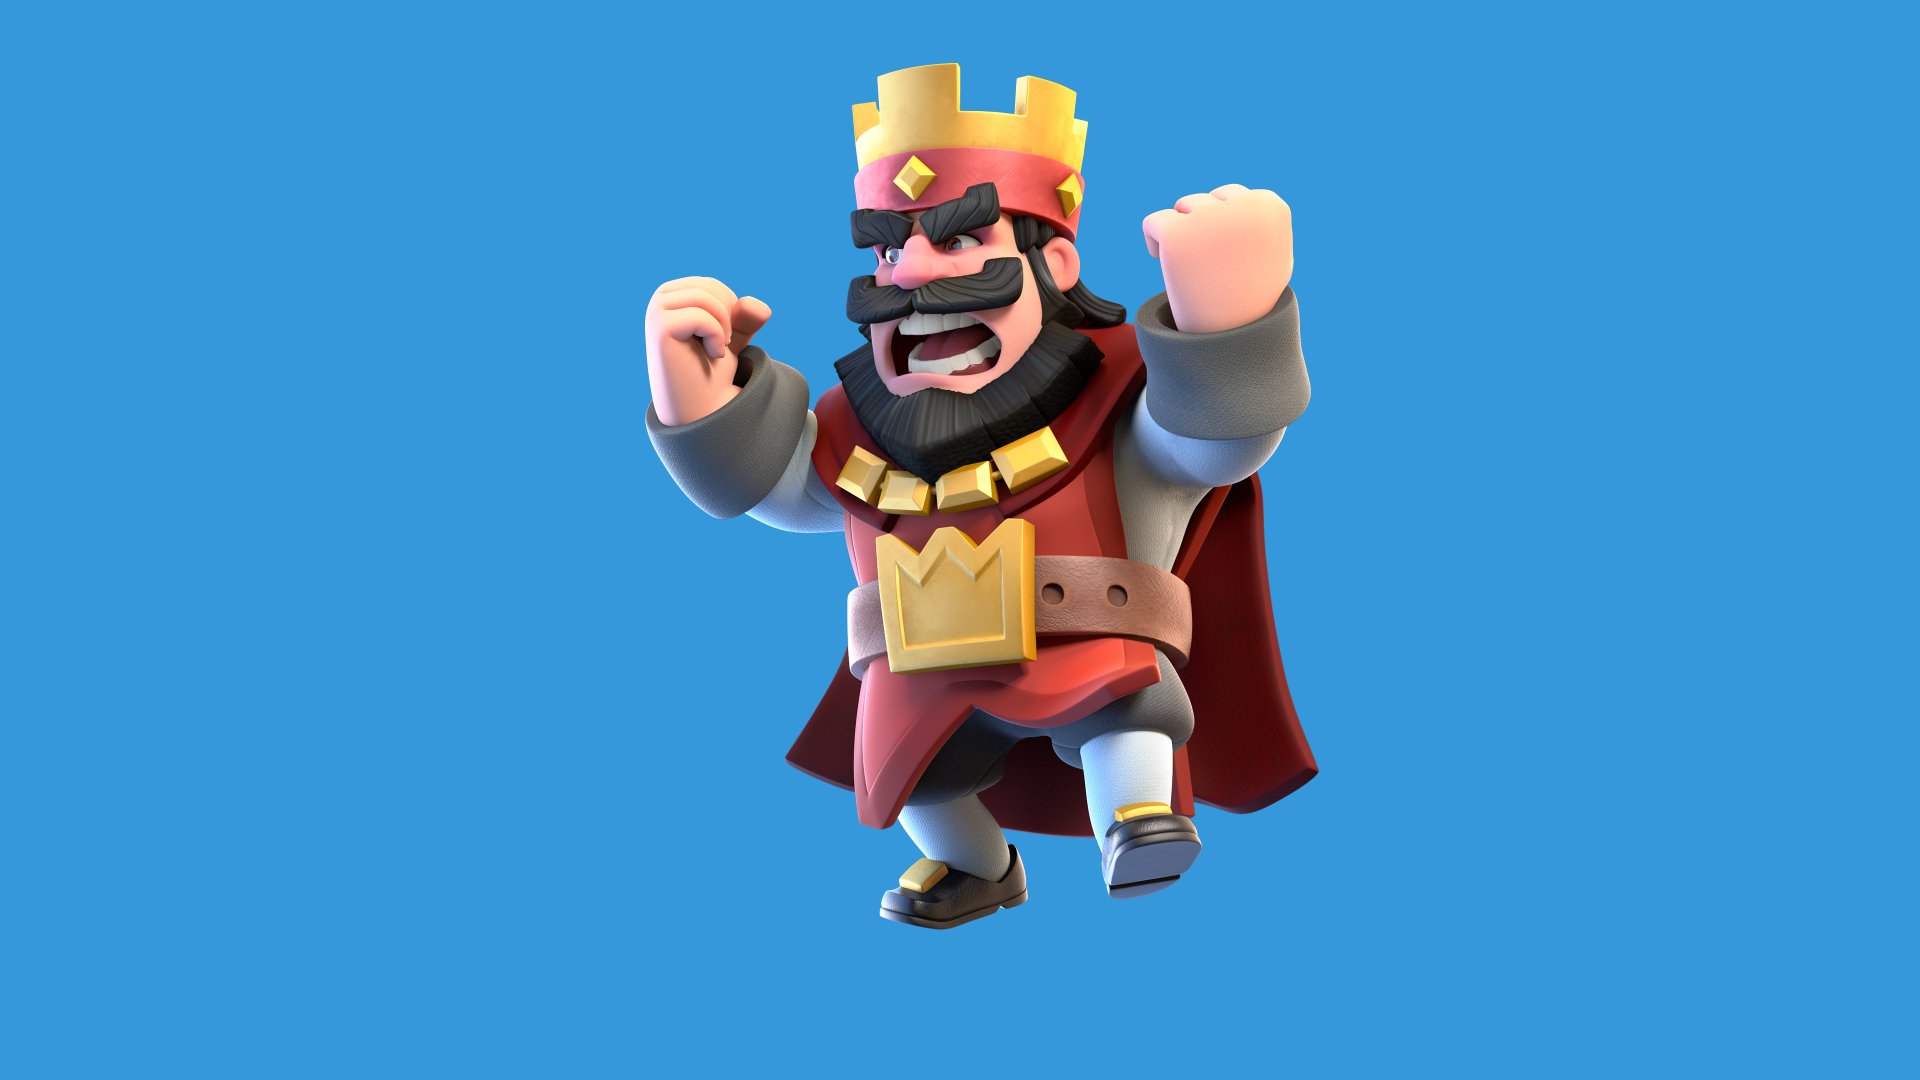 Clash Royale : King Mad 4 by Xentimus